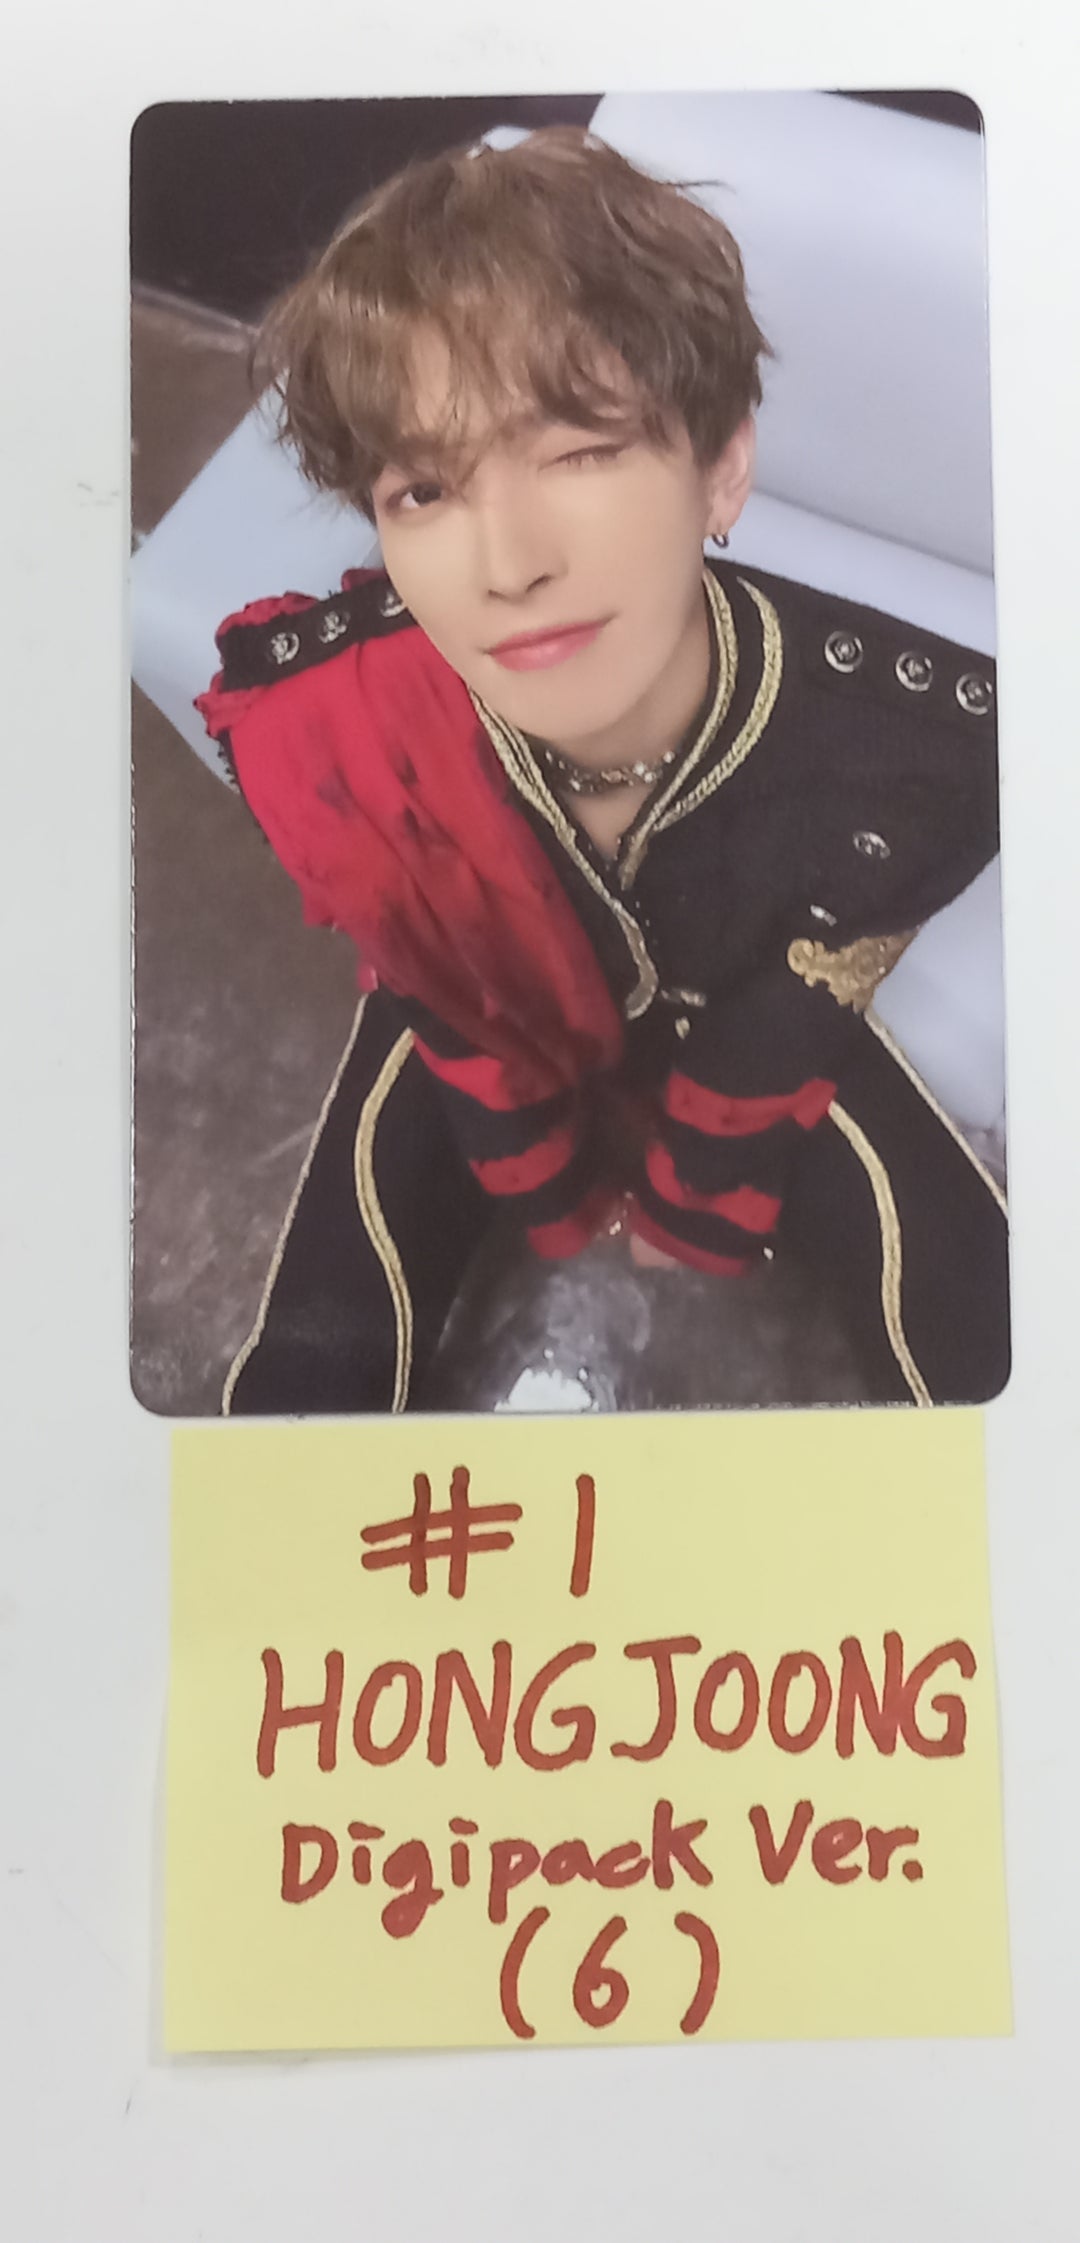 ATEEZ "THE WORLD EP.FIN : WILL" - Official Photocard [Digipack Ver.] [23.12.06]